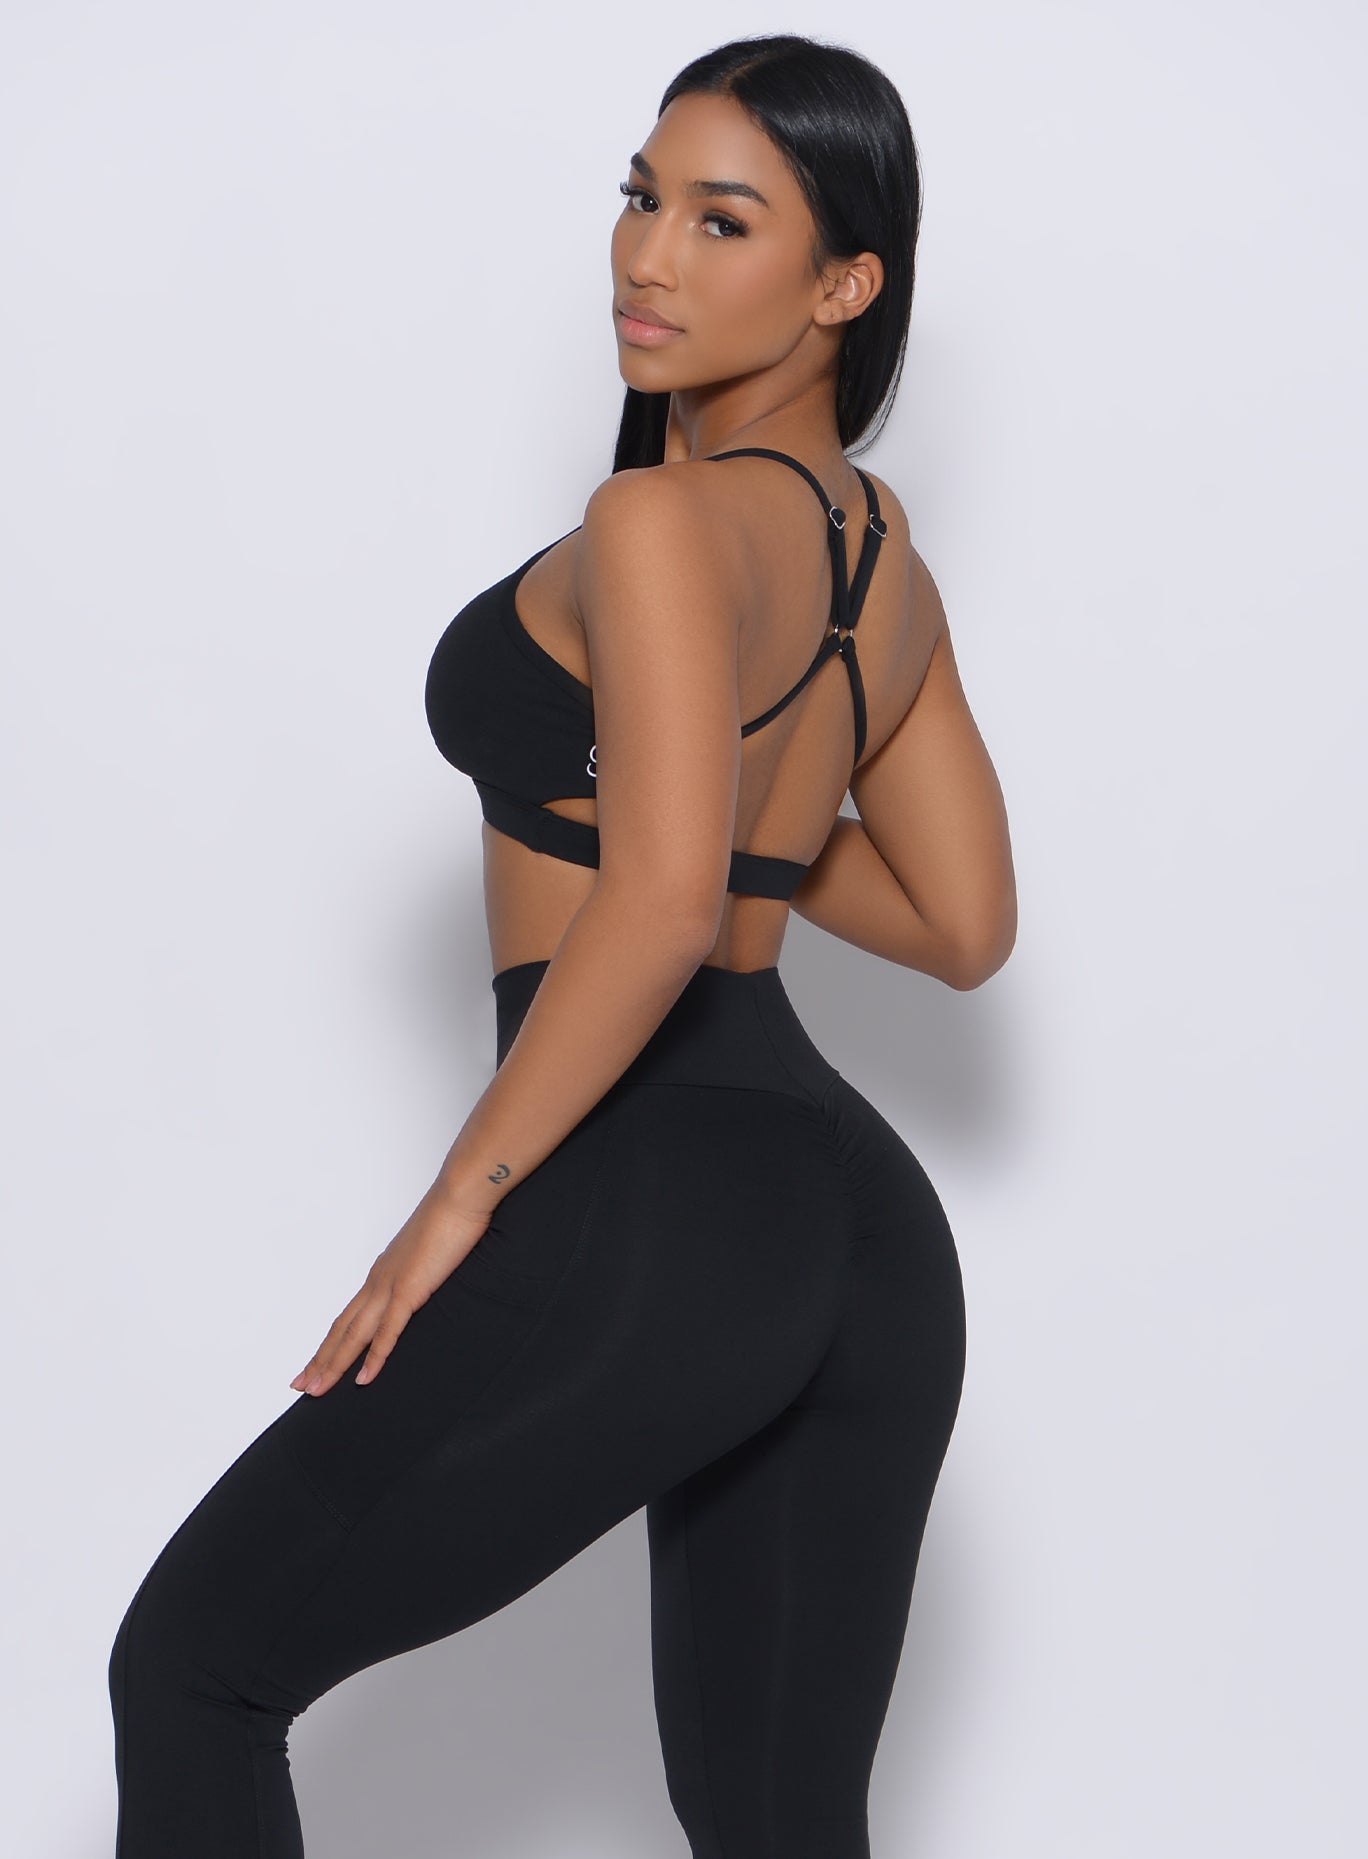 Left side profile view of a model in our black pumped sports bra and a matching leggings